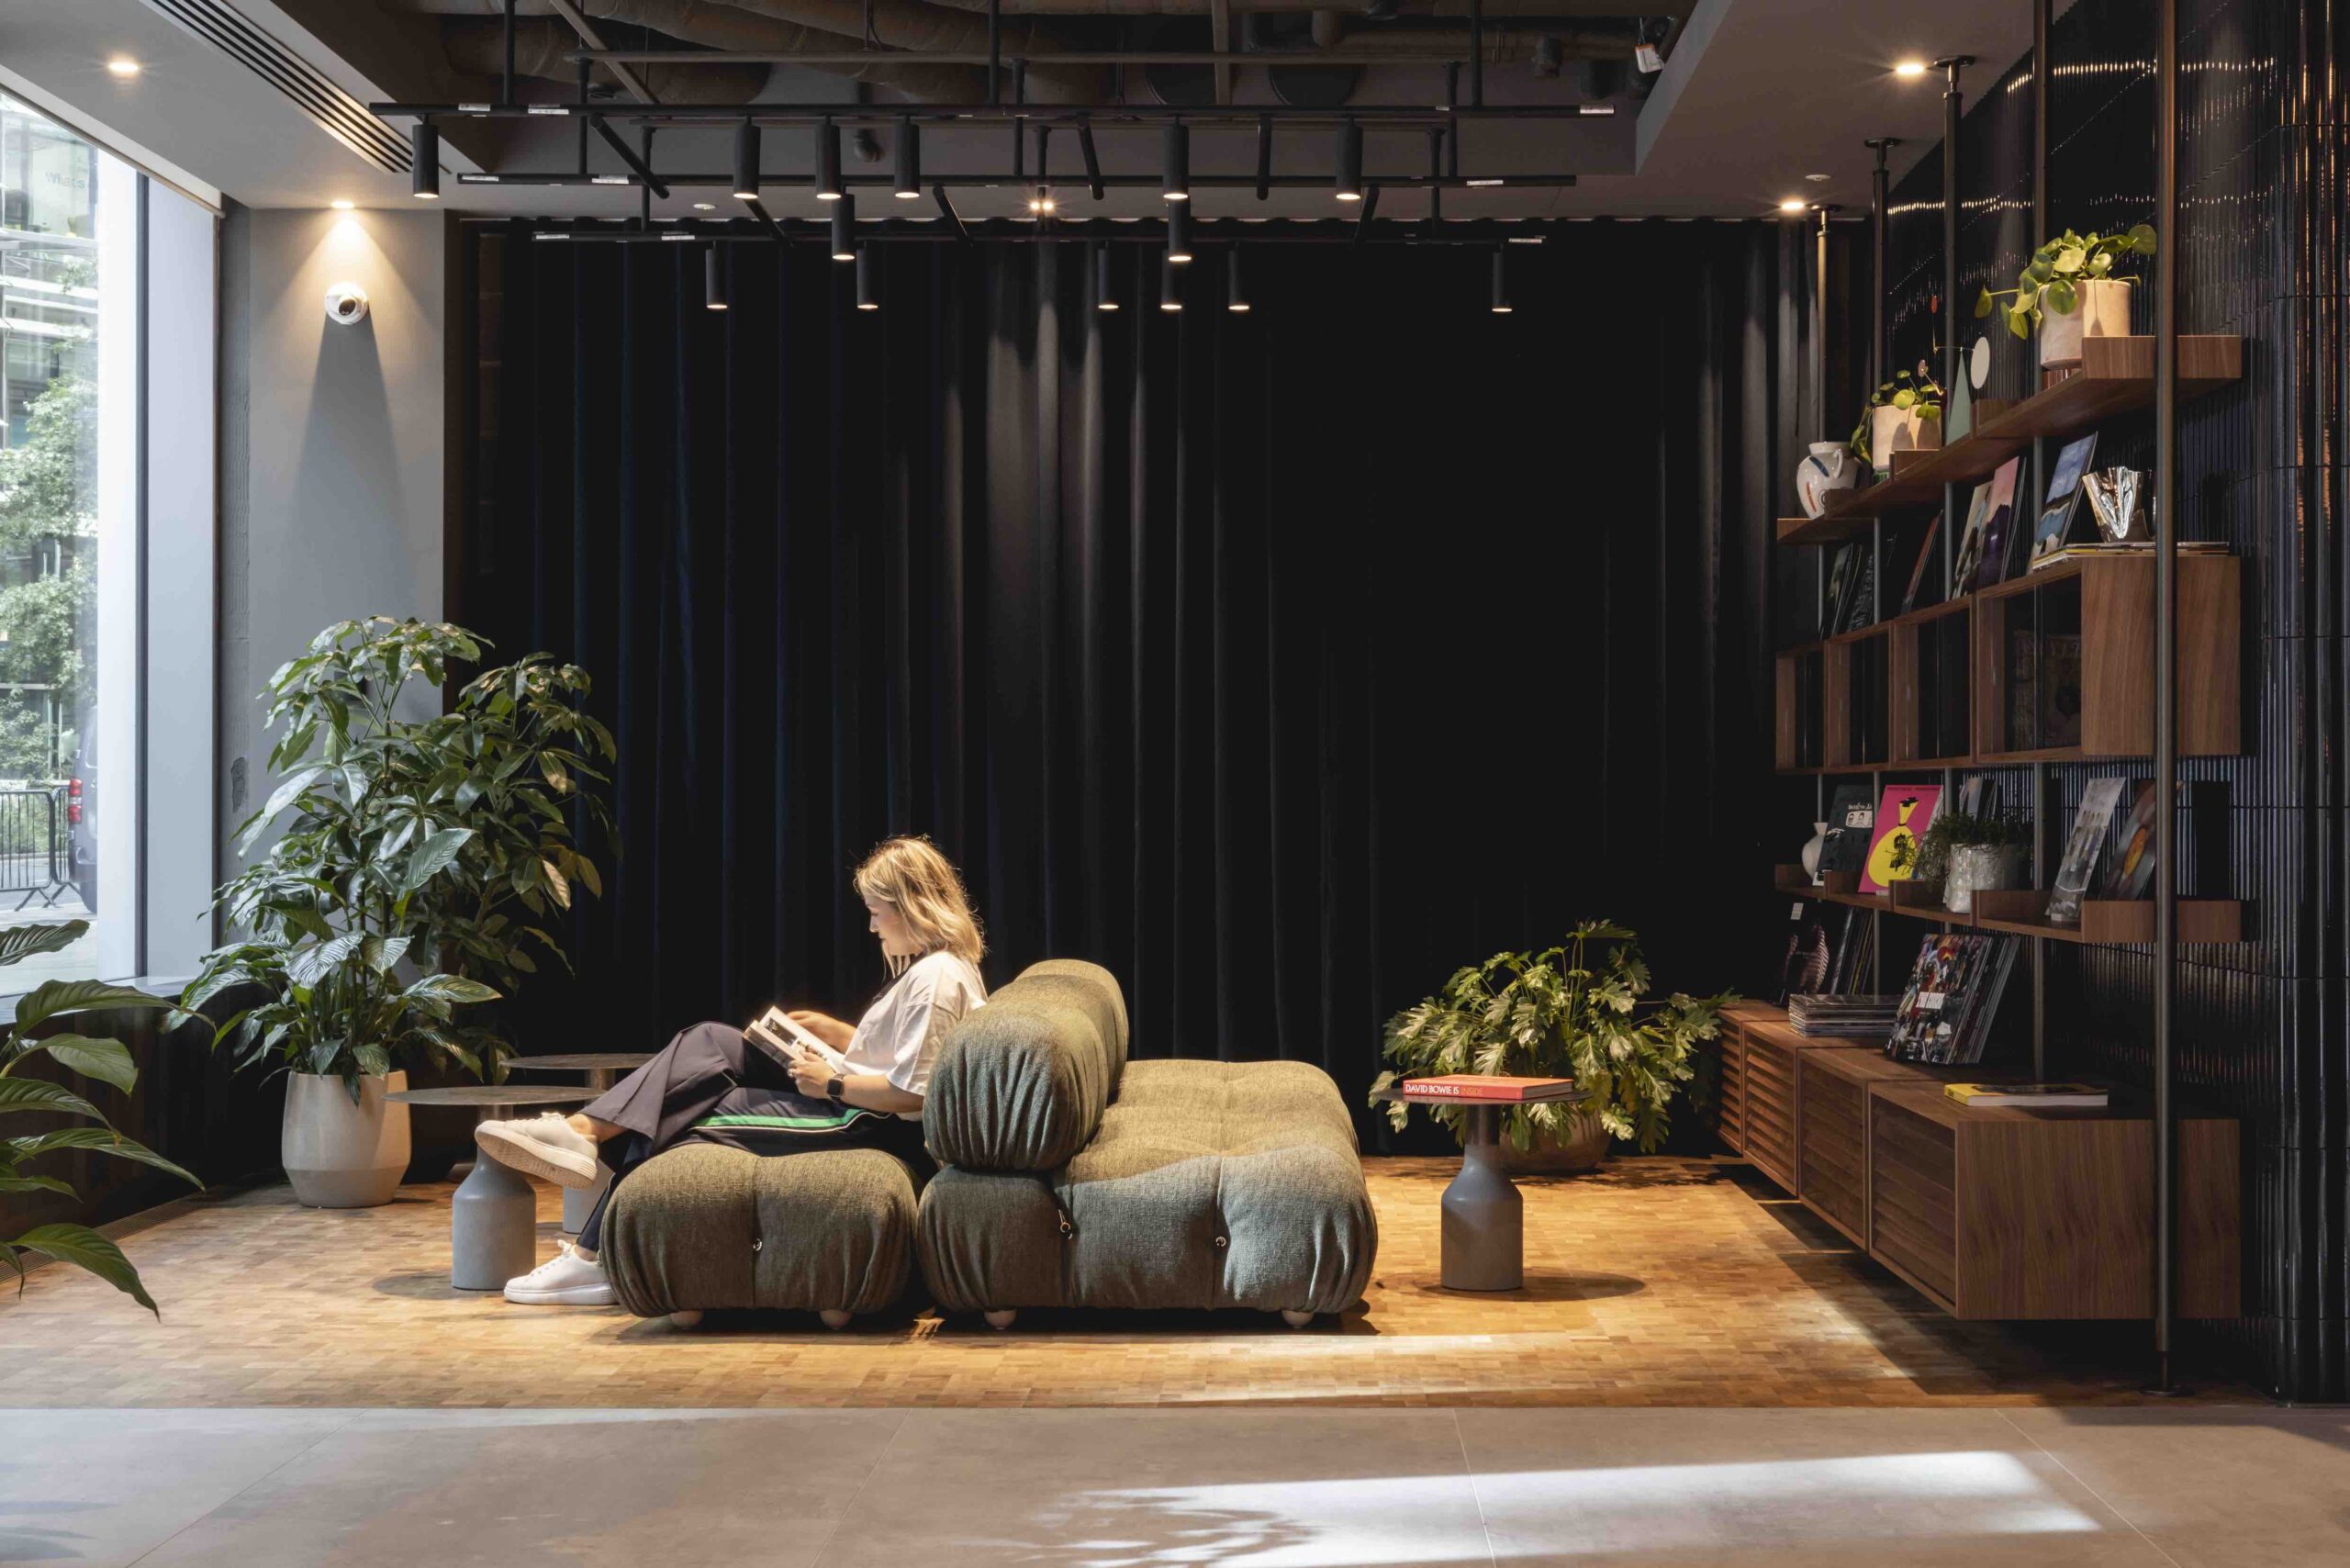 MoreySmith designs Sony Music’s London HQ bringing all of its record labels under one roof